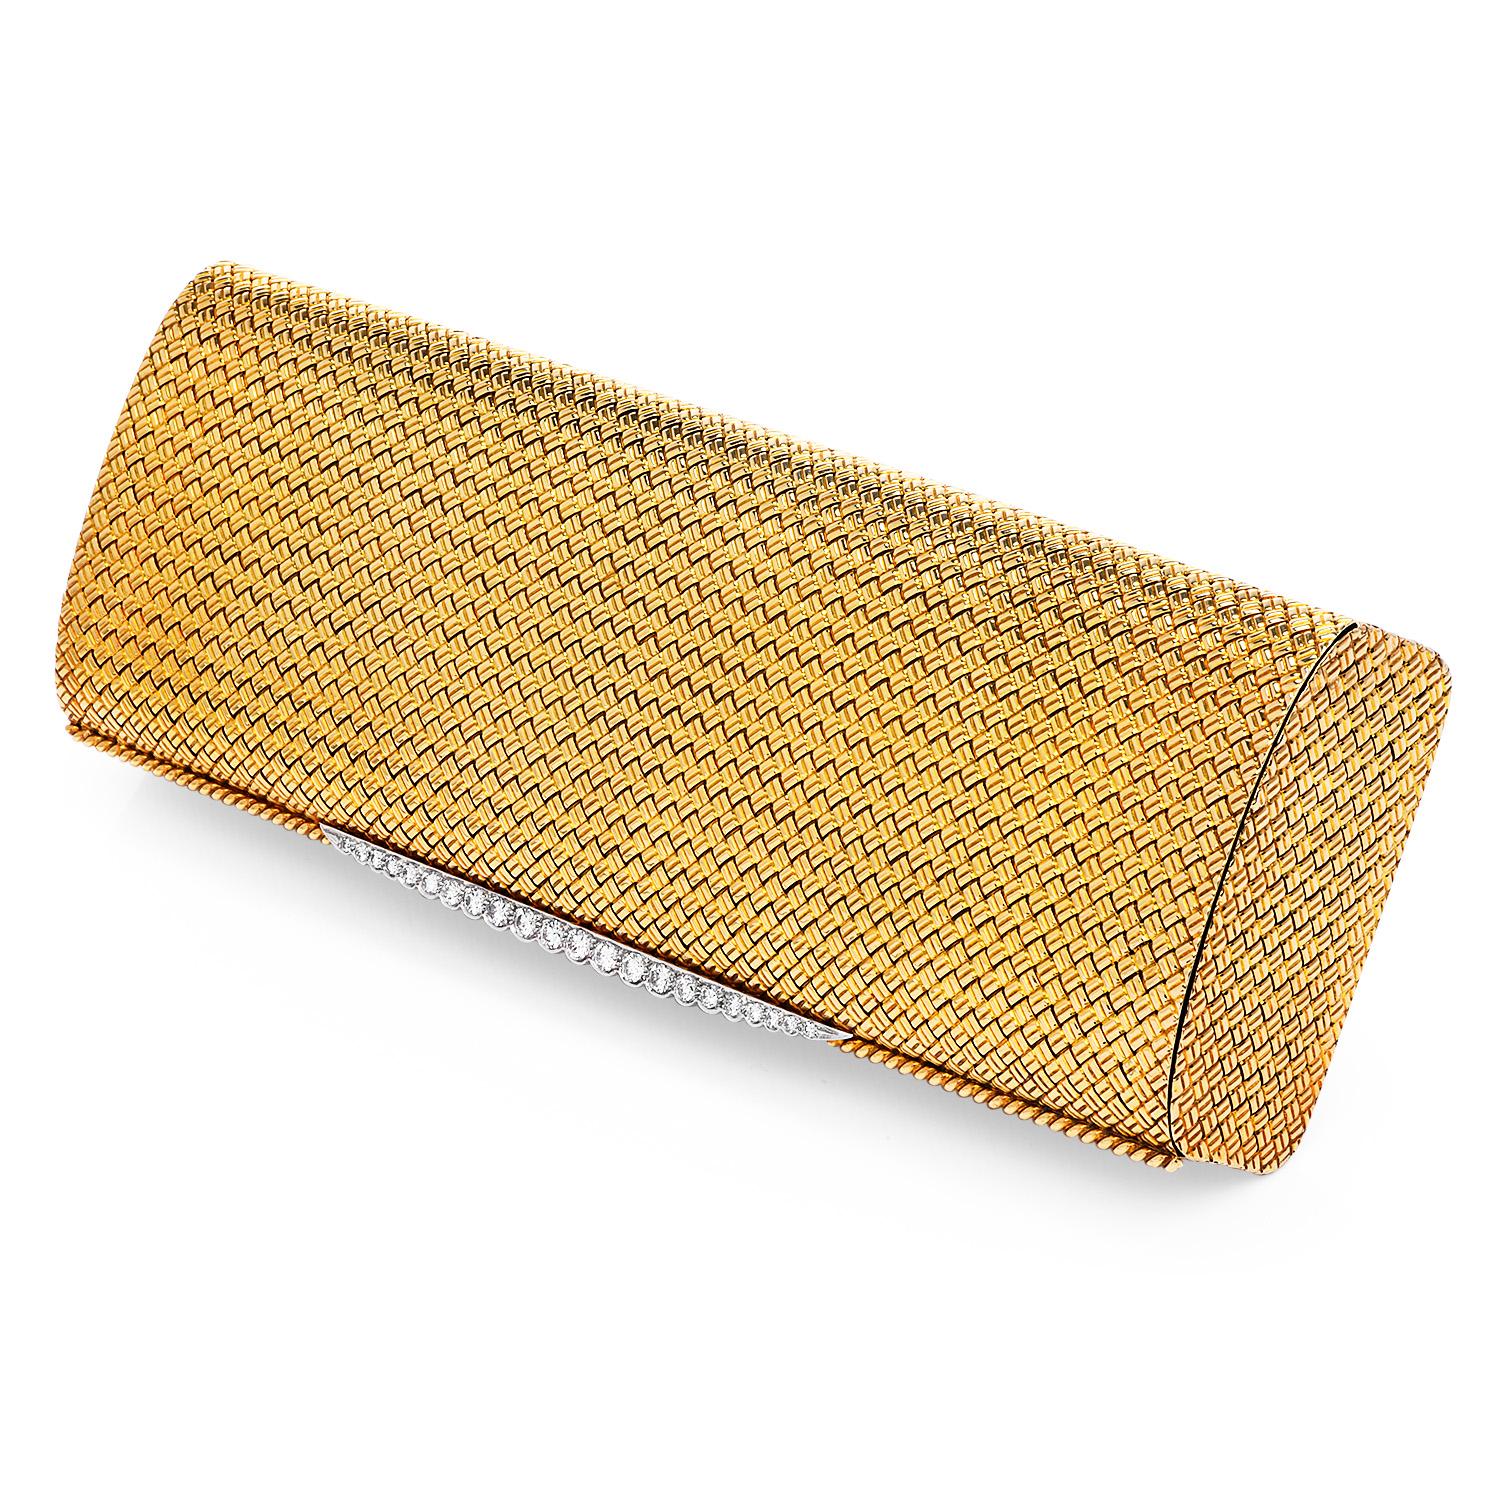 This exquisite Vintage Van Cleef & Arpels Clutch Purse from the 1960s has a woven style and it is crafted in solid with 18K Yellow Gold.

Topped with (22) round cut, pave set, genuine diamonds, weighing approximately 1.50 carats ( E-F color and